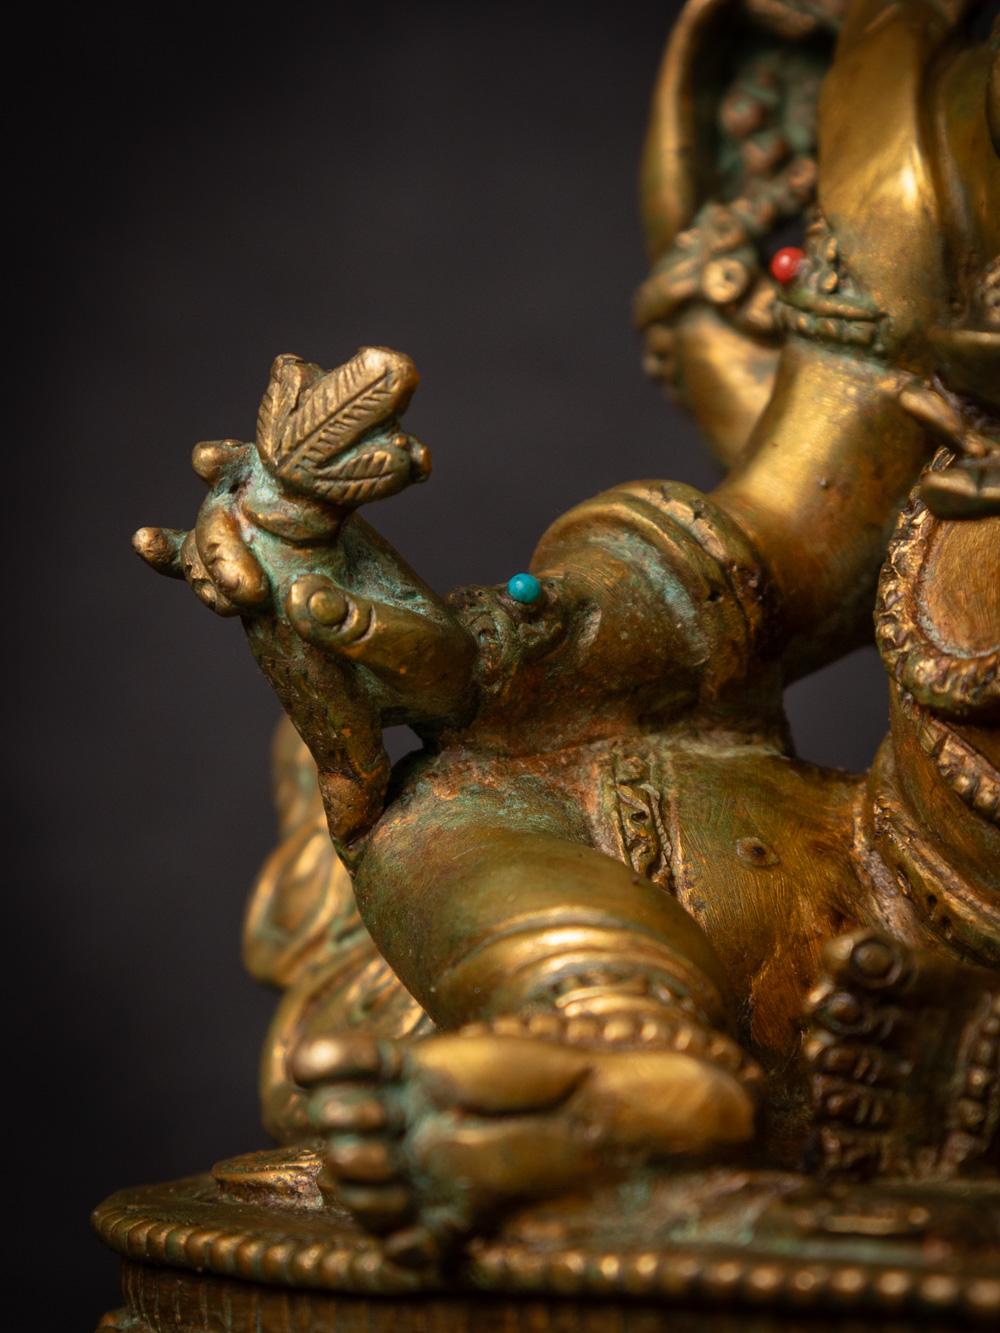 Middle 20th century old bronze Nepali Ganesha statue fire gold gilded 12